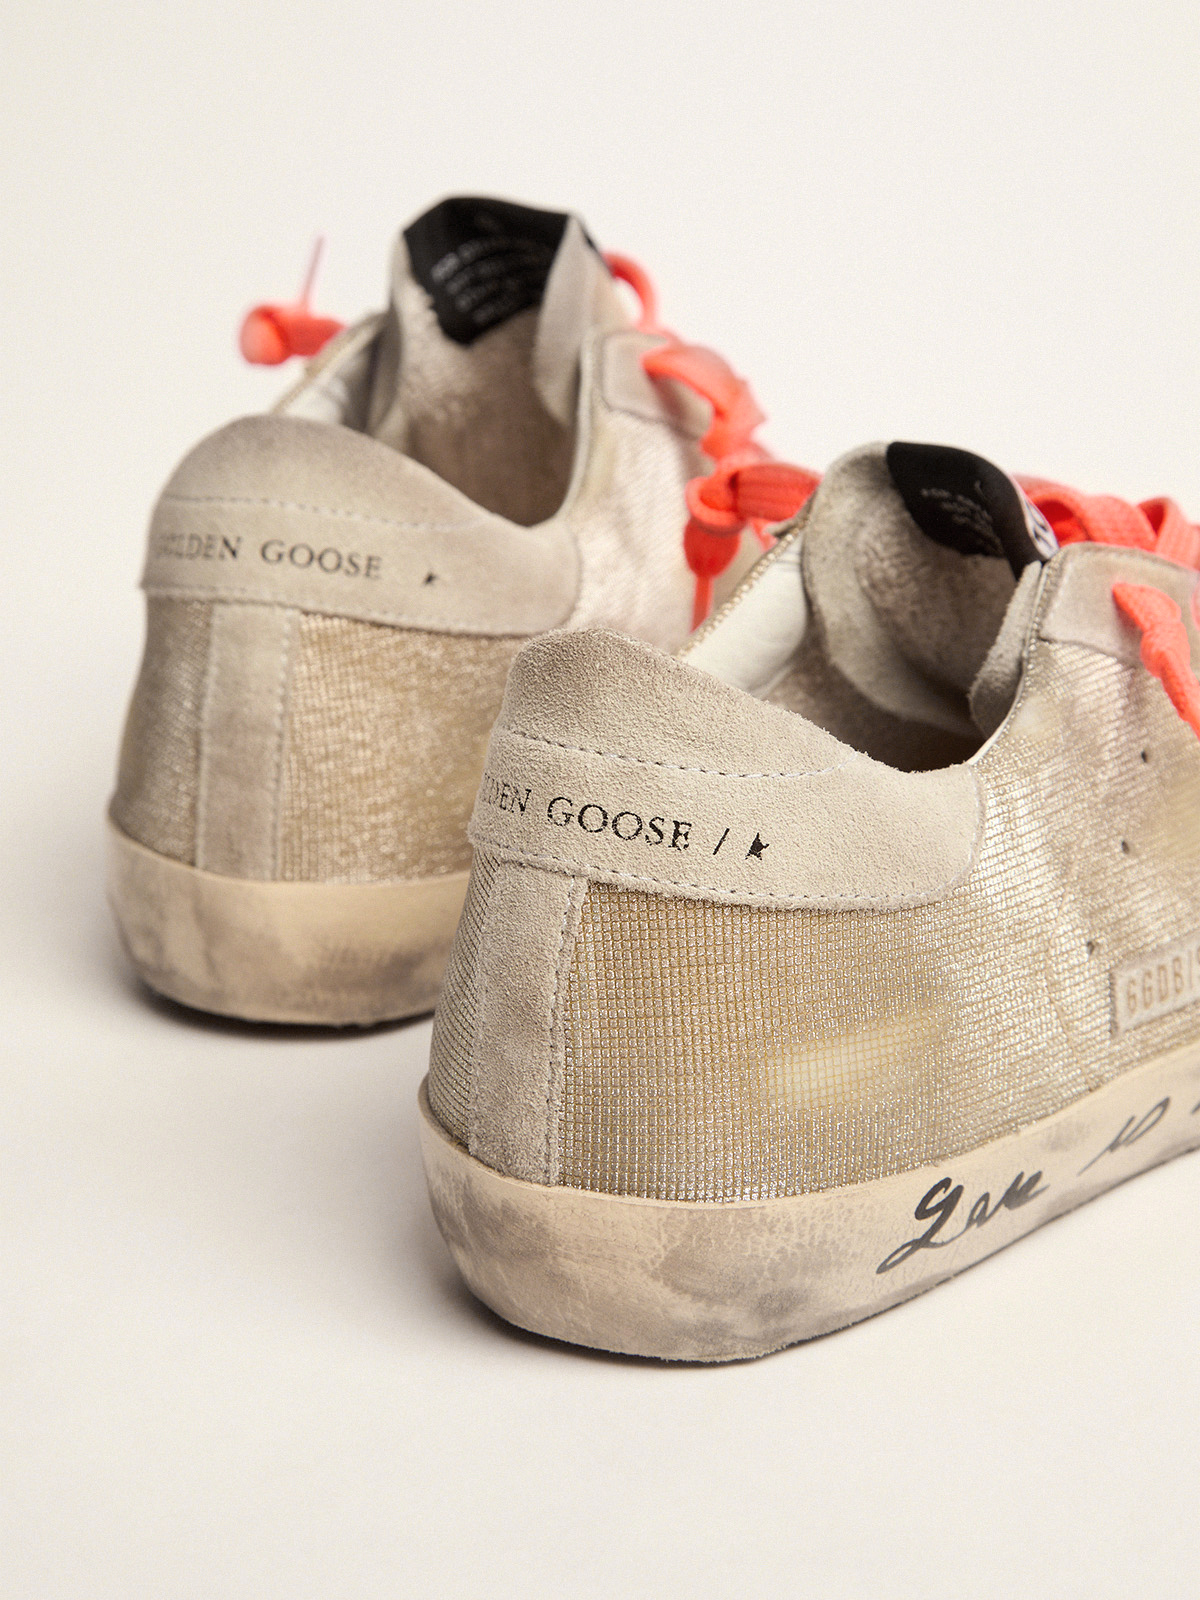 Gold-colored Super-Star sneakers with checkered pattern and handwriting |  Golden Goose